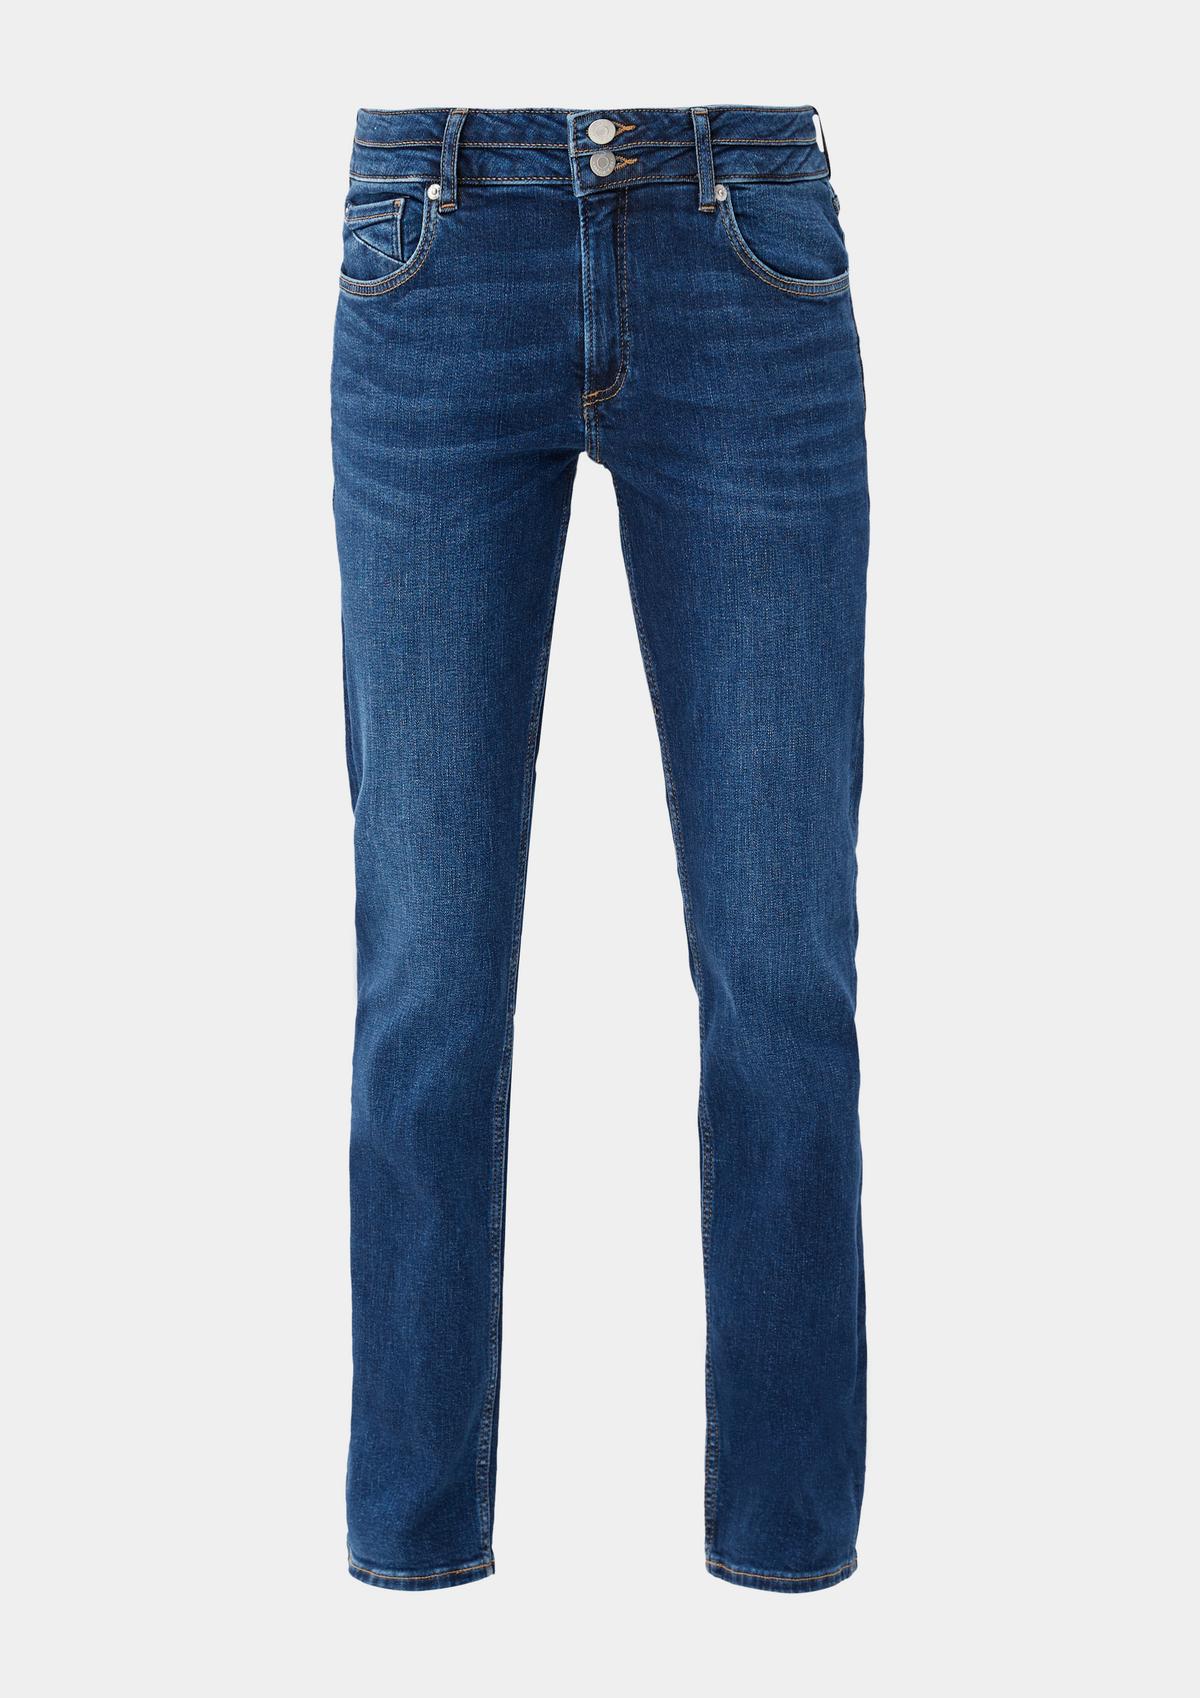 s.Oliver Jeans Catie / slim fit / mid rise / straight leg